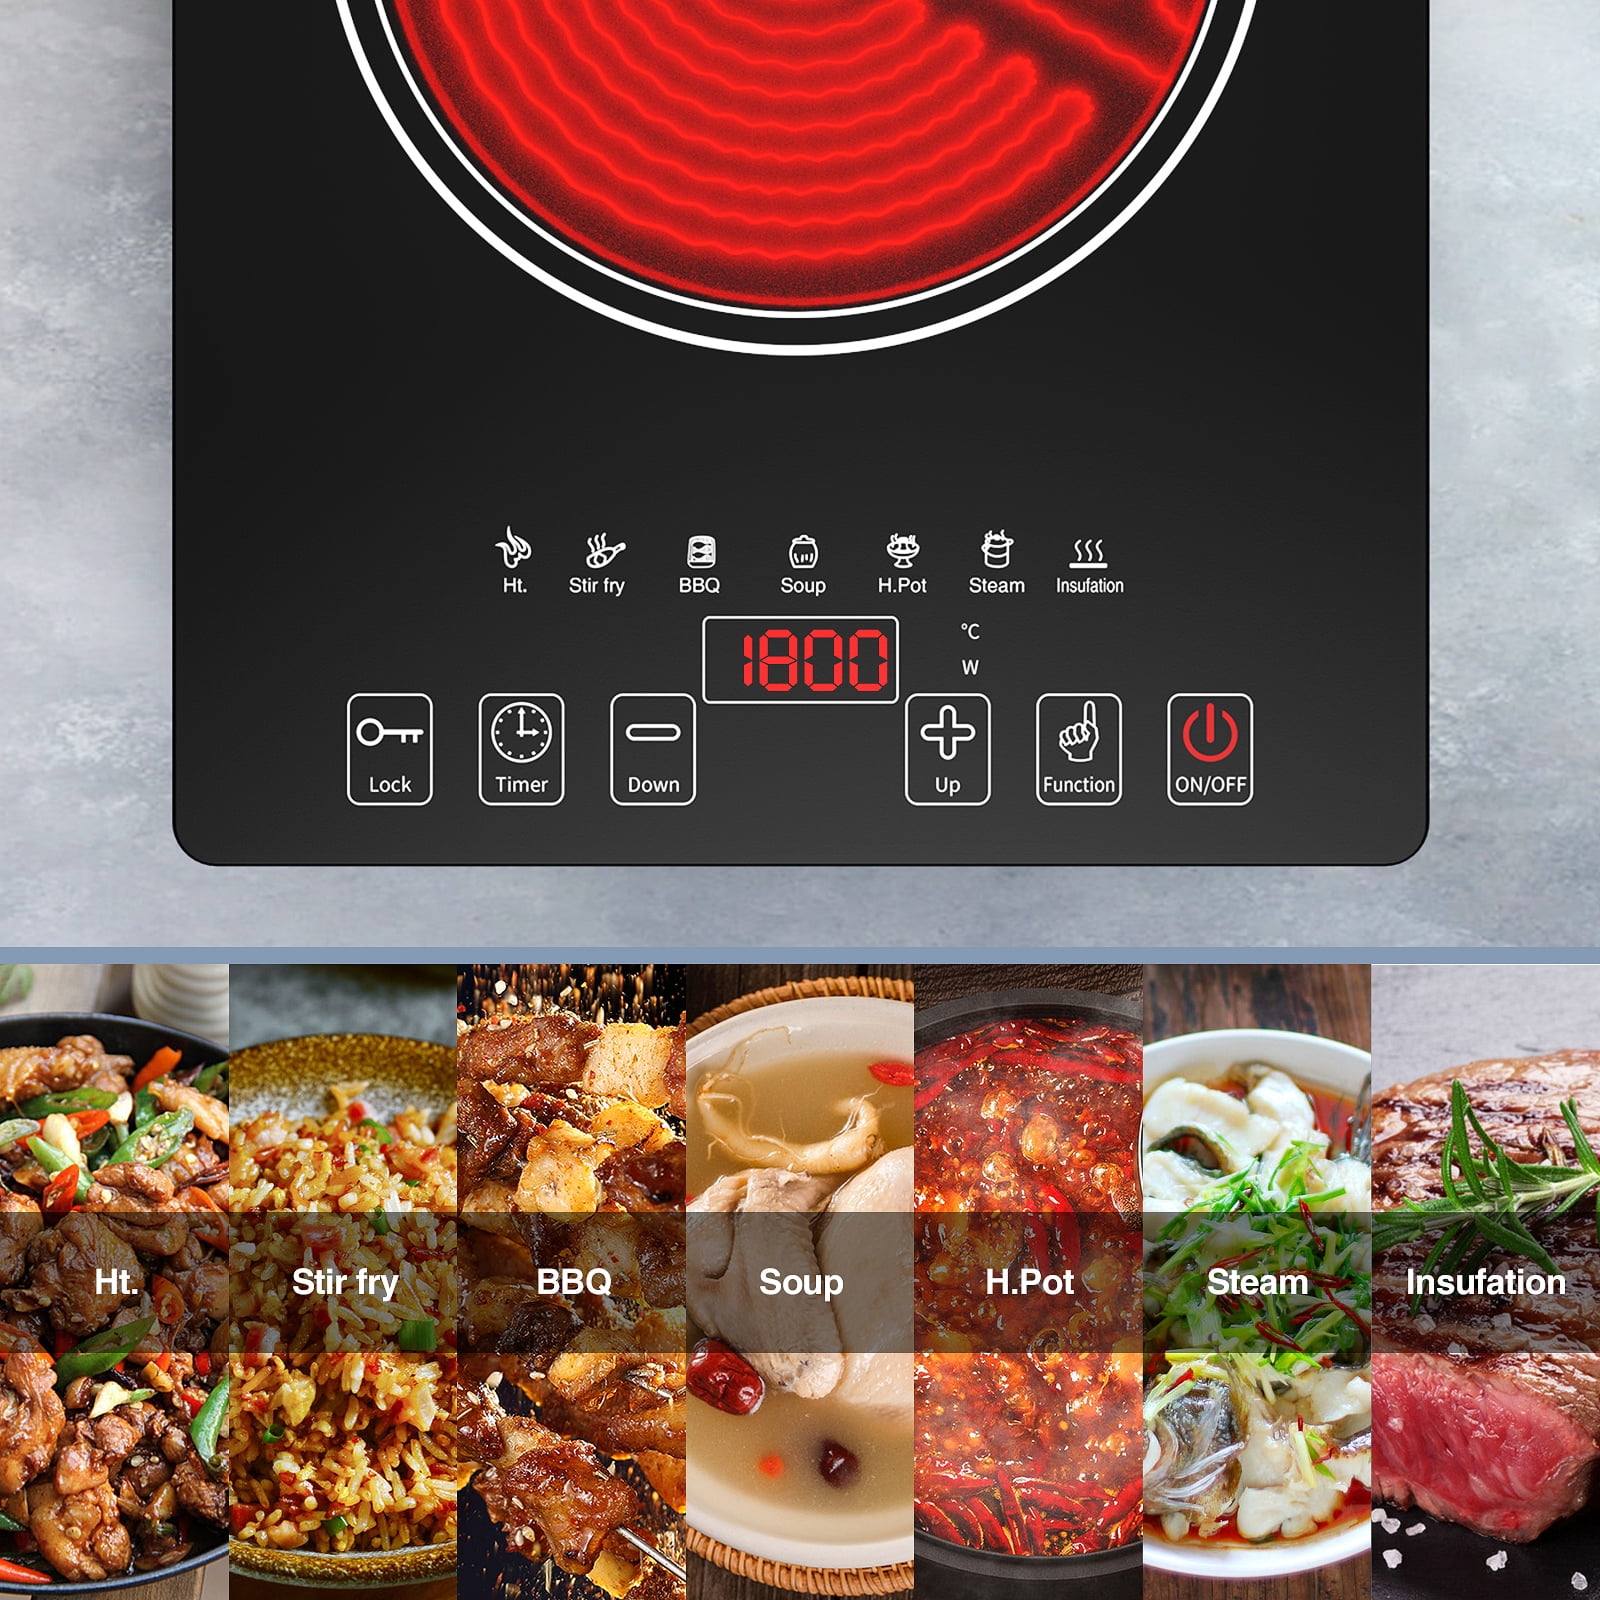 QTYANCY Portable Induction Cooktop, 110V Electric Cooktop Countertop Burner with LED Touch Screen, Overheat Protection Function